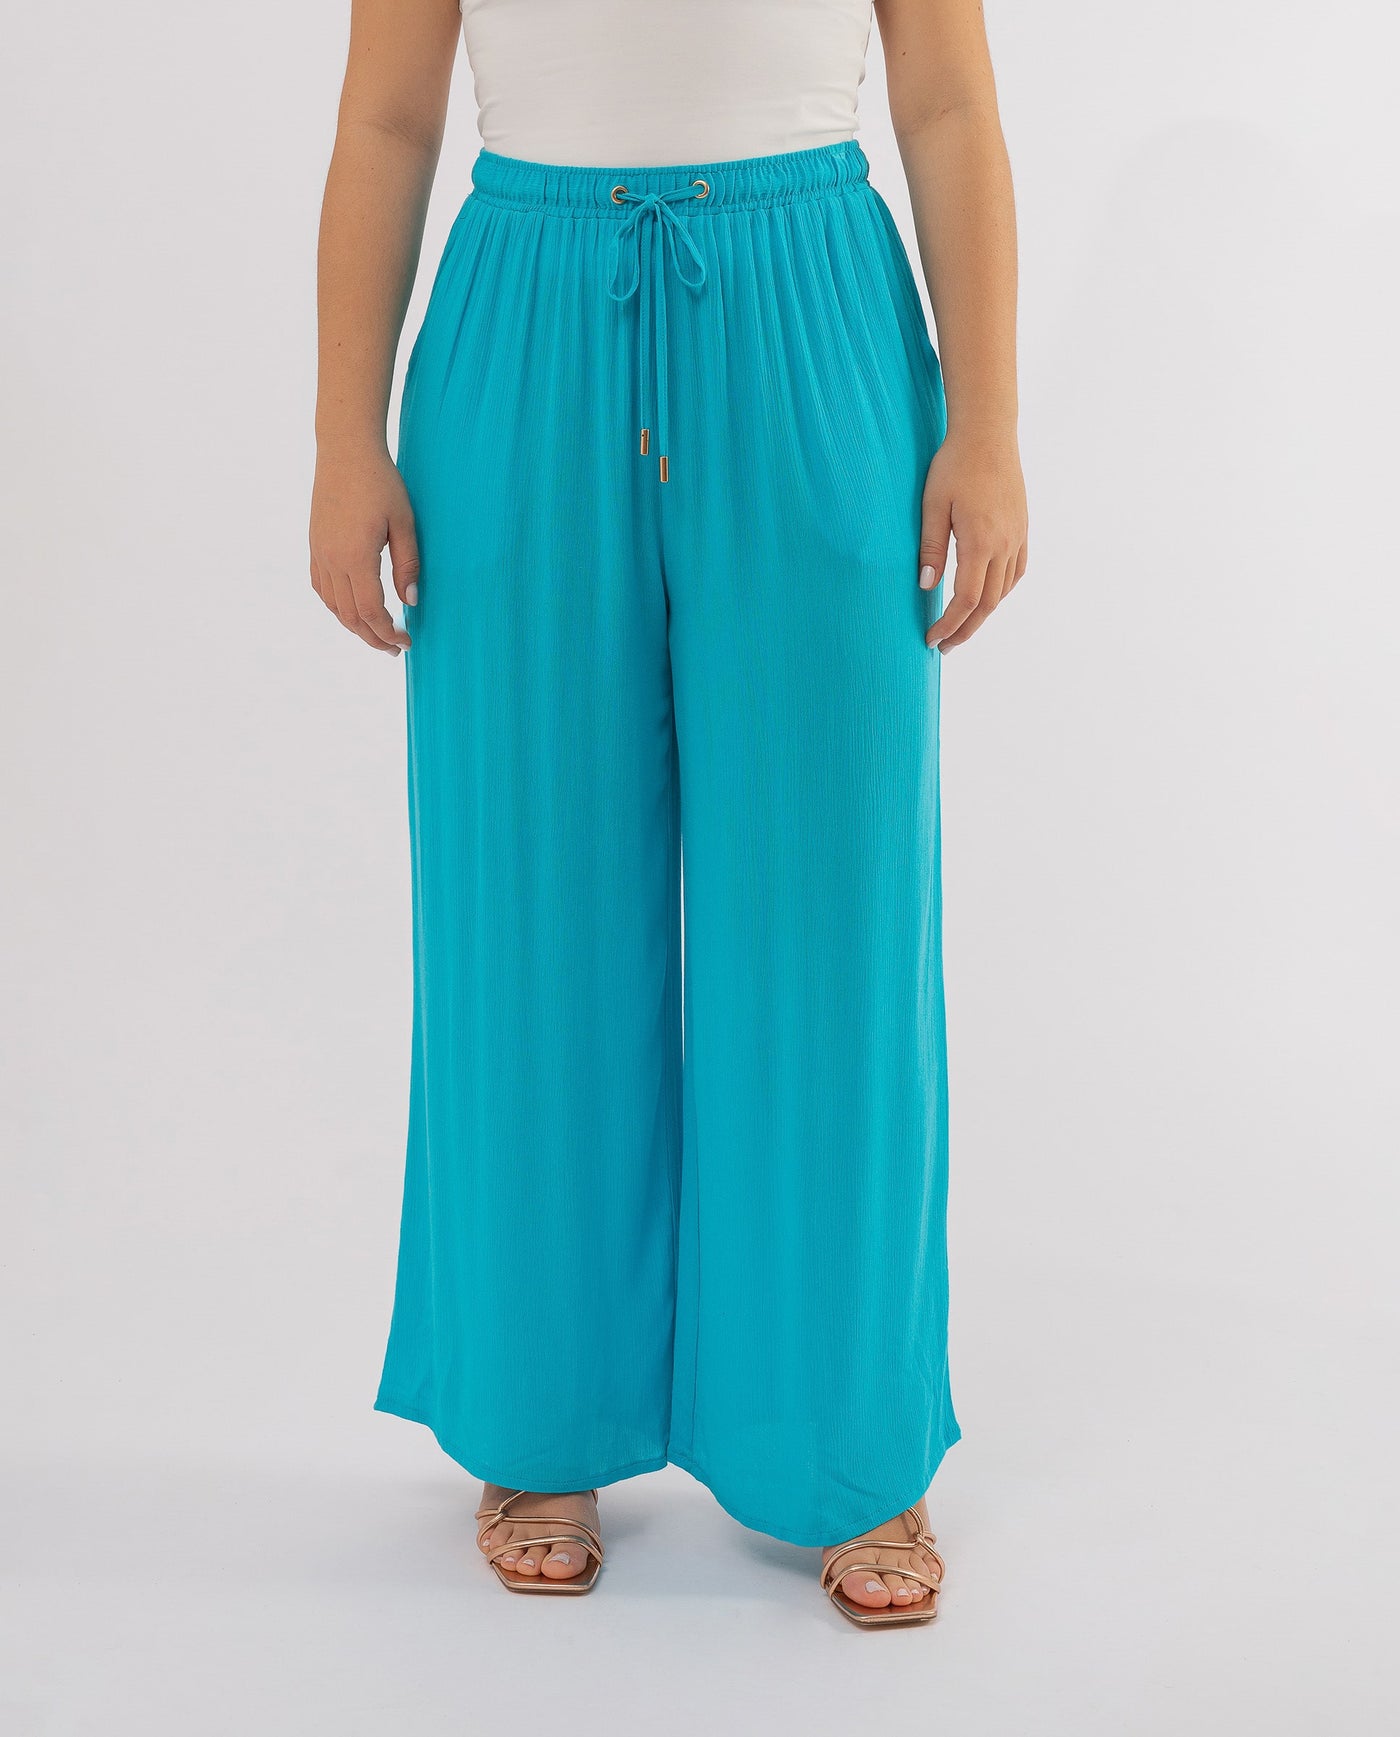 TURQUOISE FLOWING WIDE LEG TROUSERS